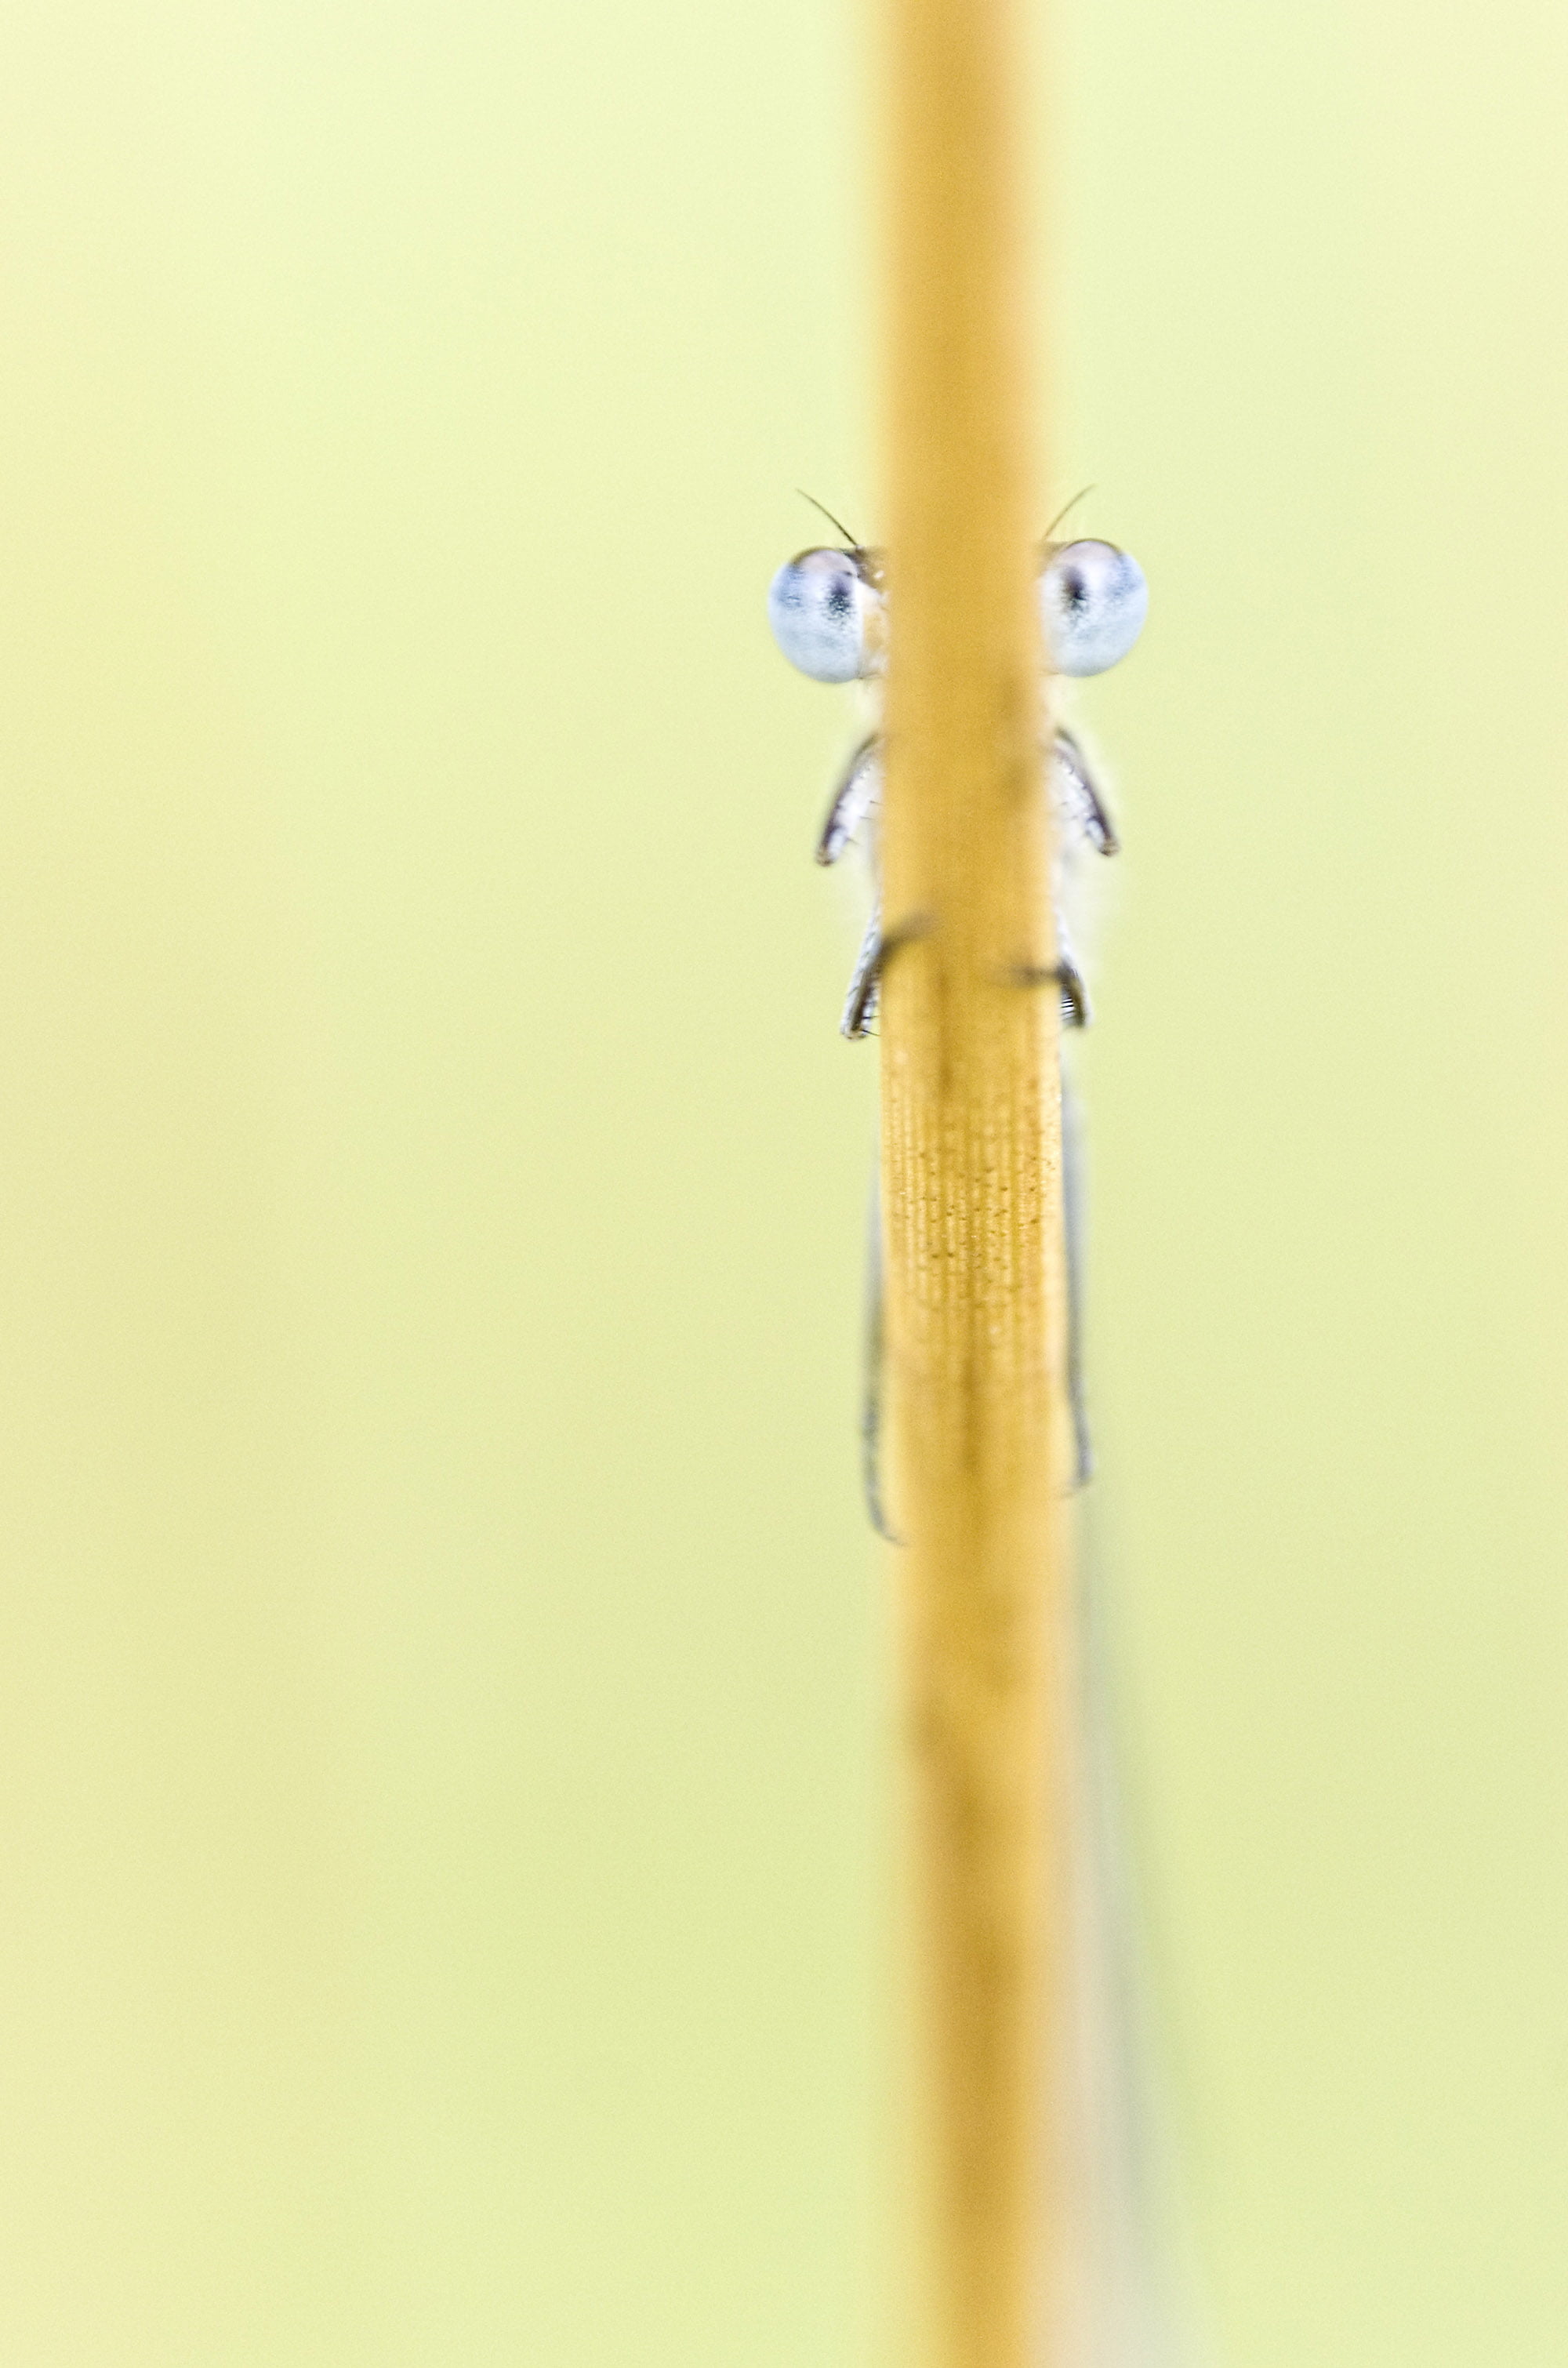 Dragonfly perched on brown leaf in macro photography, damselfly